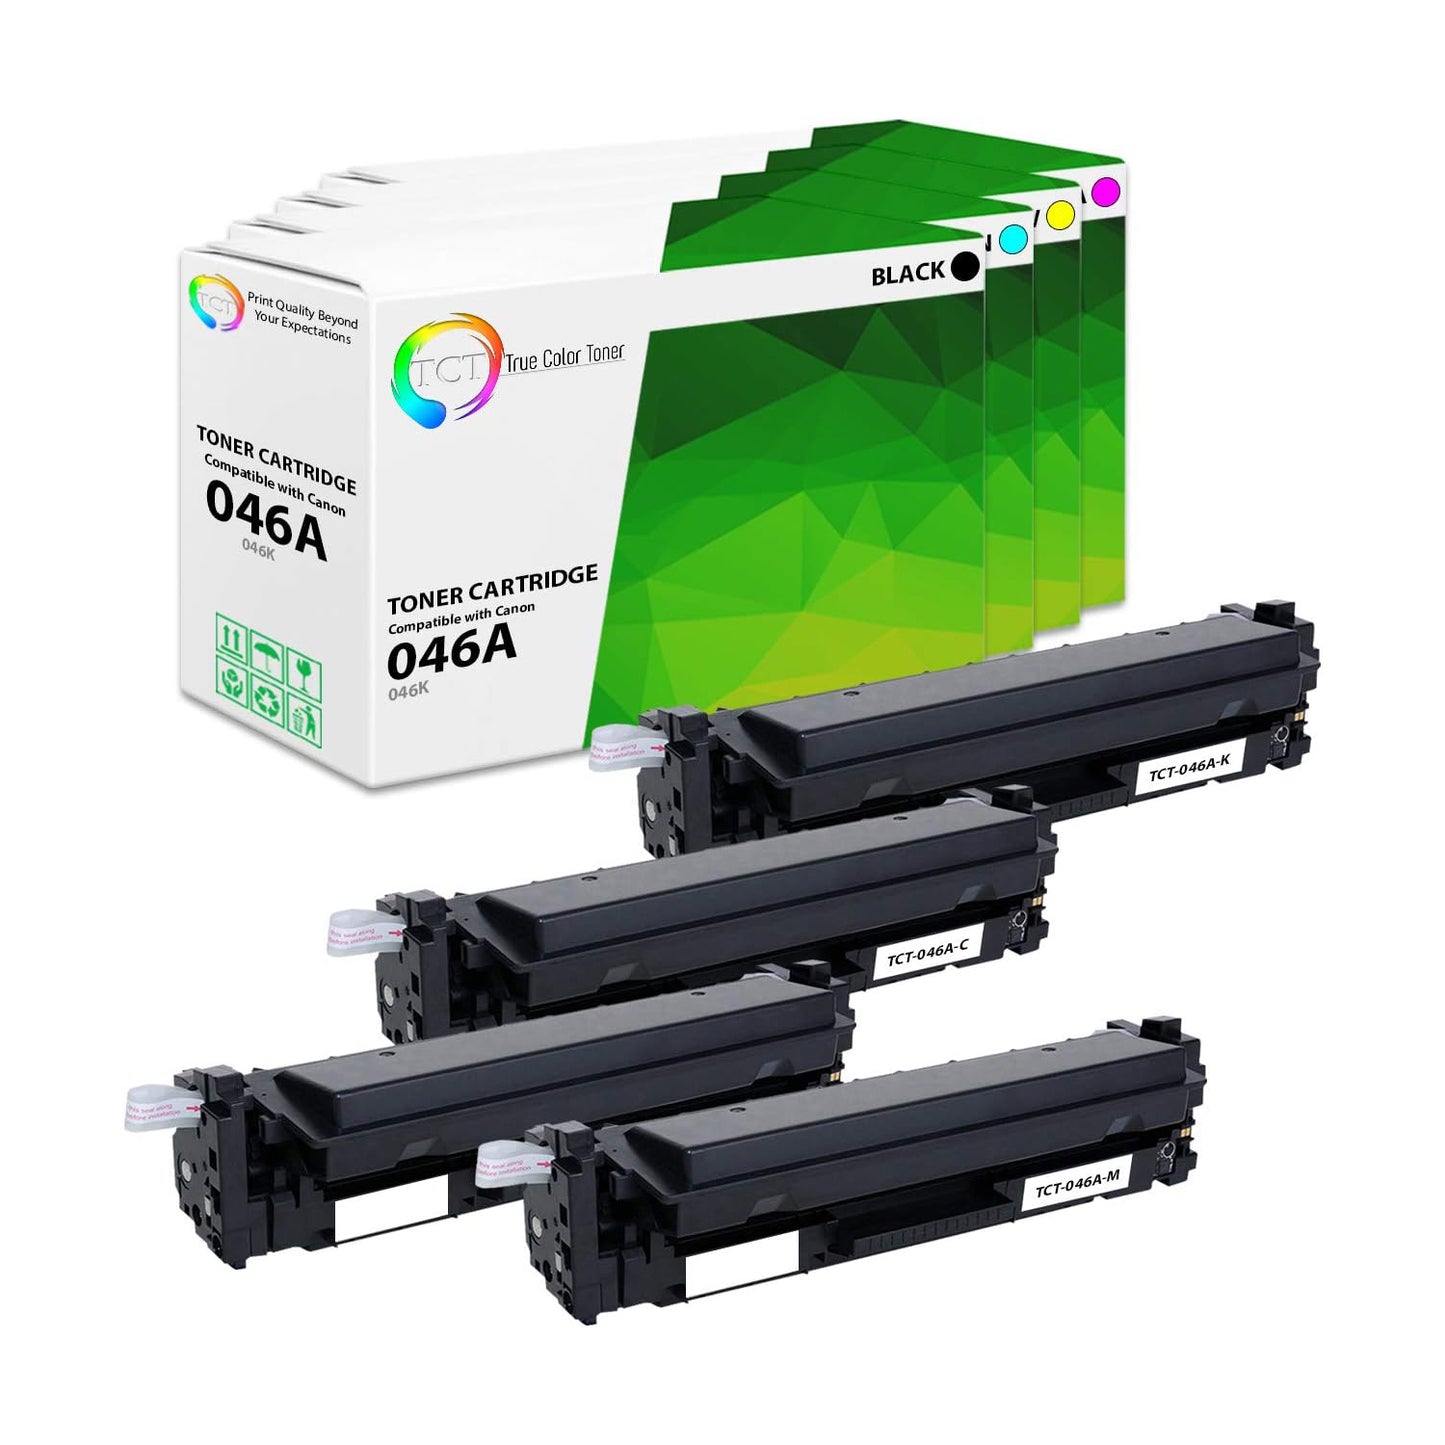 TCT Compatible Toner Cartridge Replacement for the Canon 046 Series - 4 Pack (BK, C, M, Y)